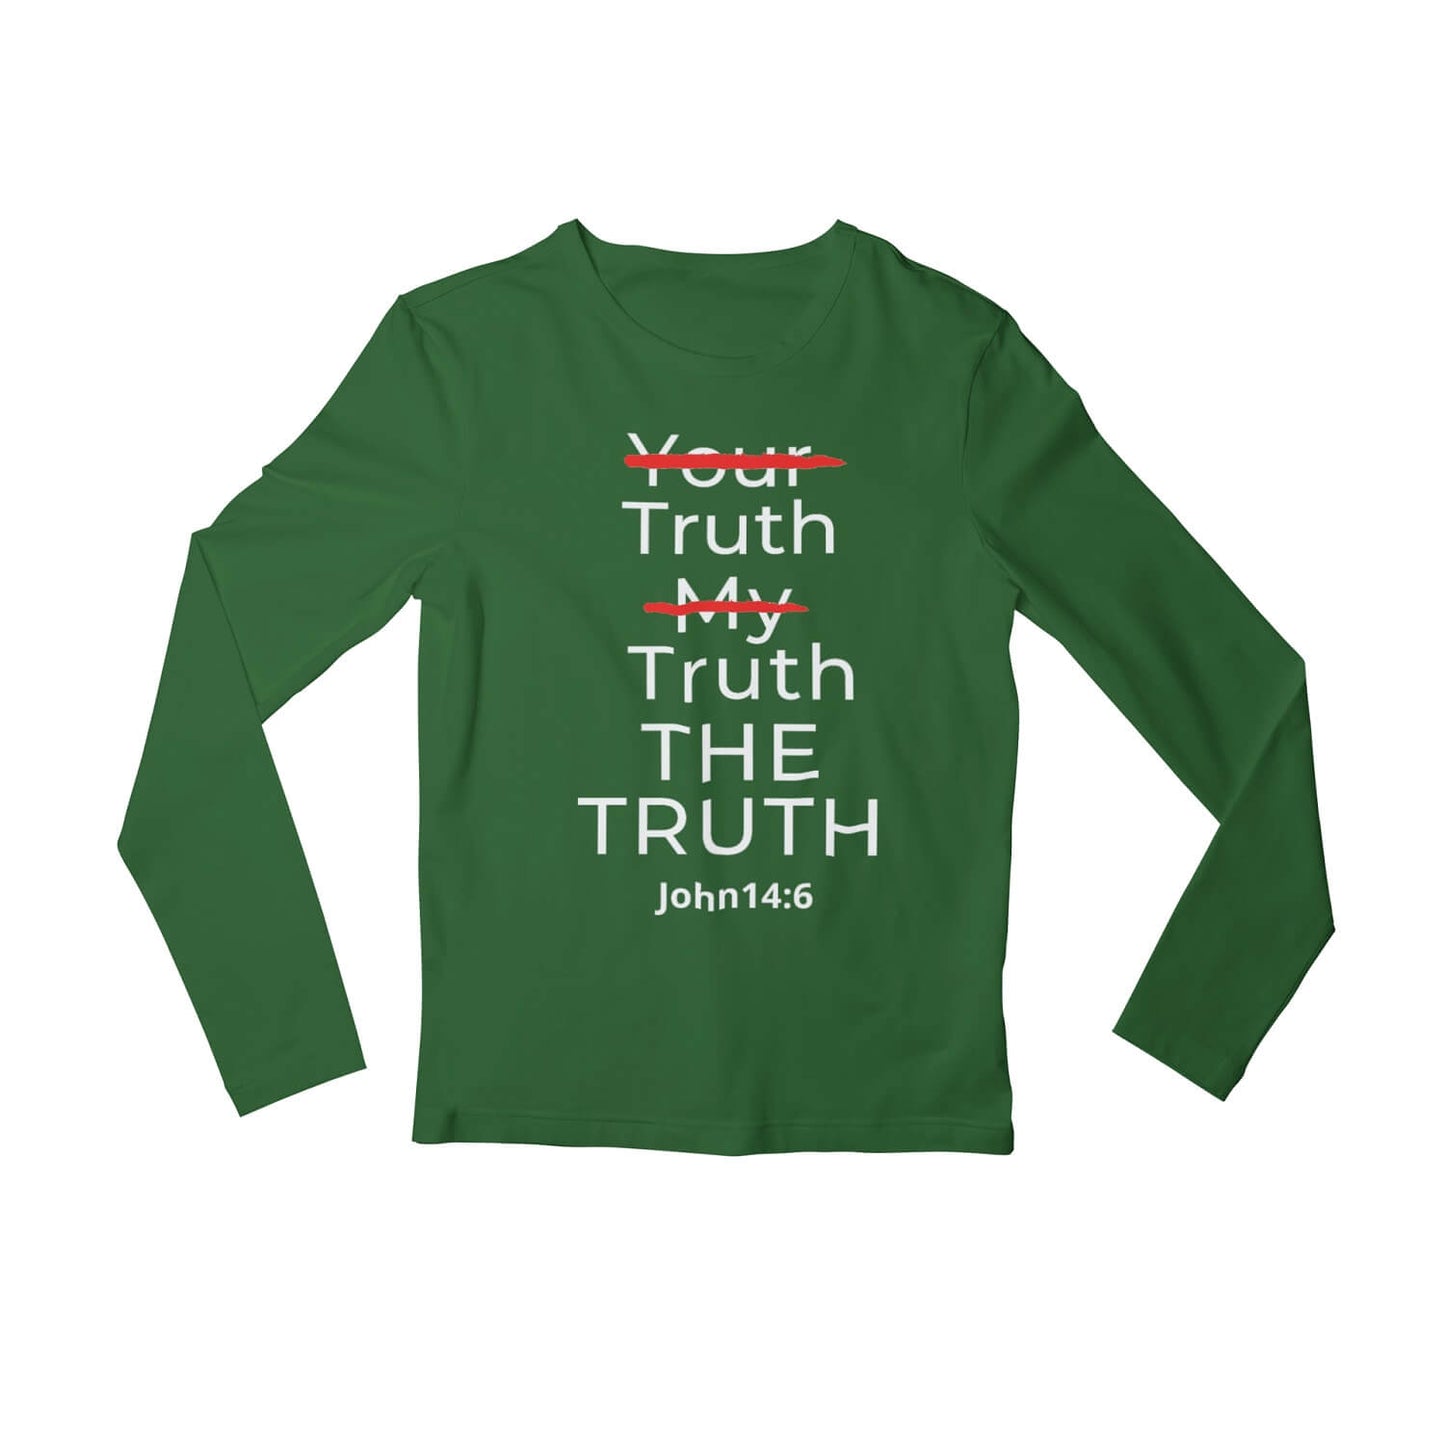 The Truth Unisex Christian Long Sleeve T-Shirt Olive / S